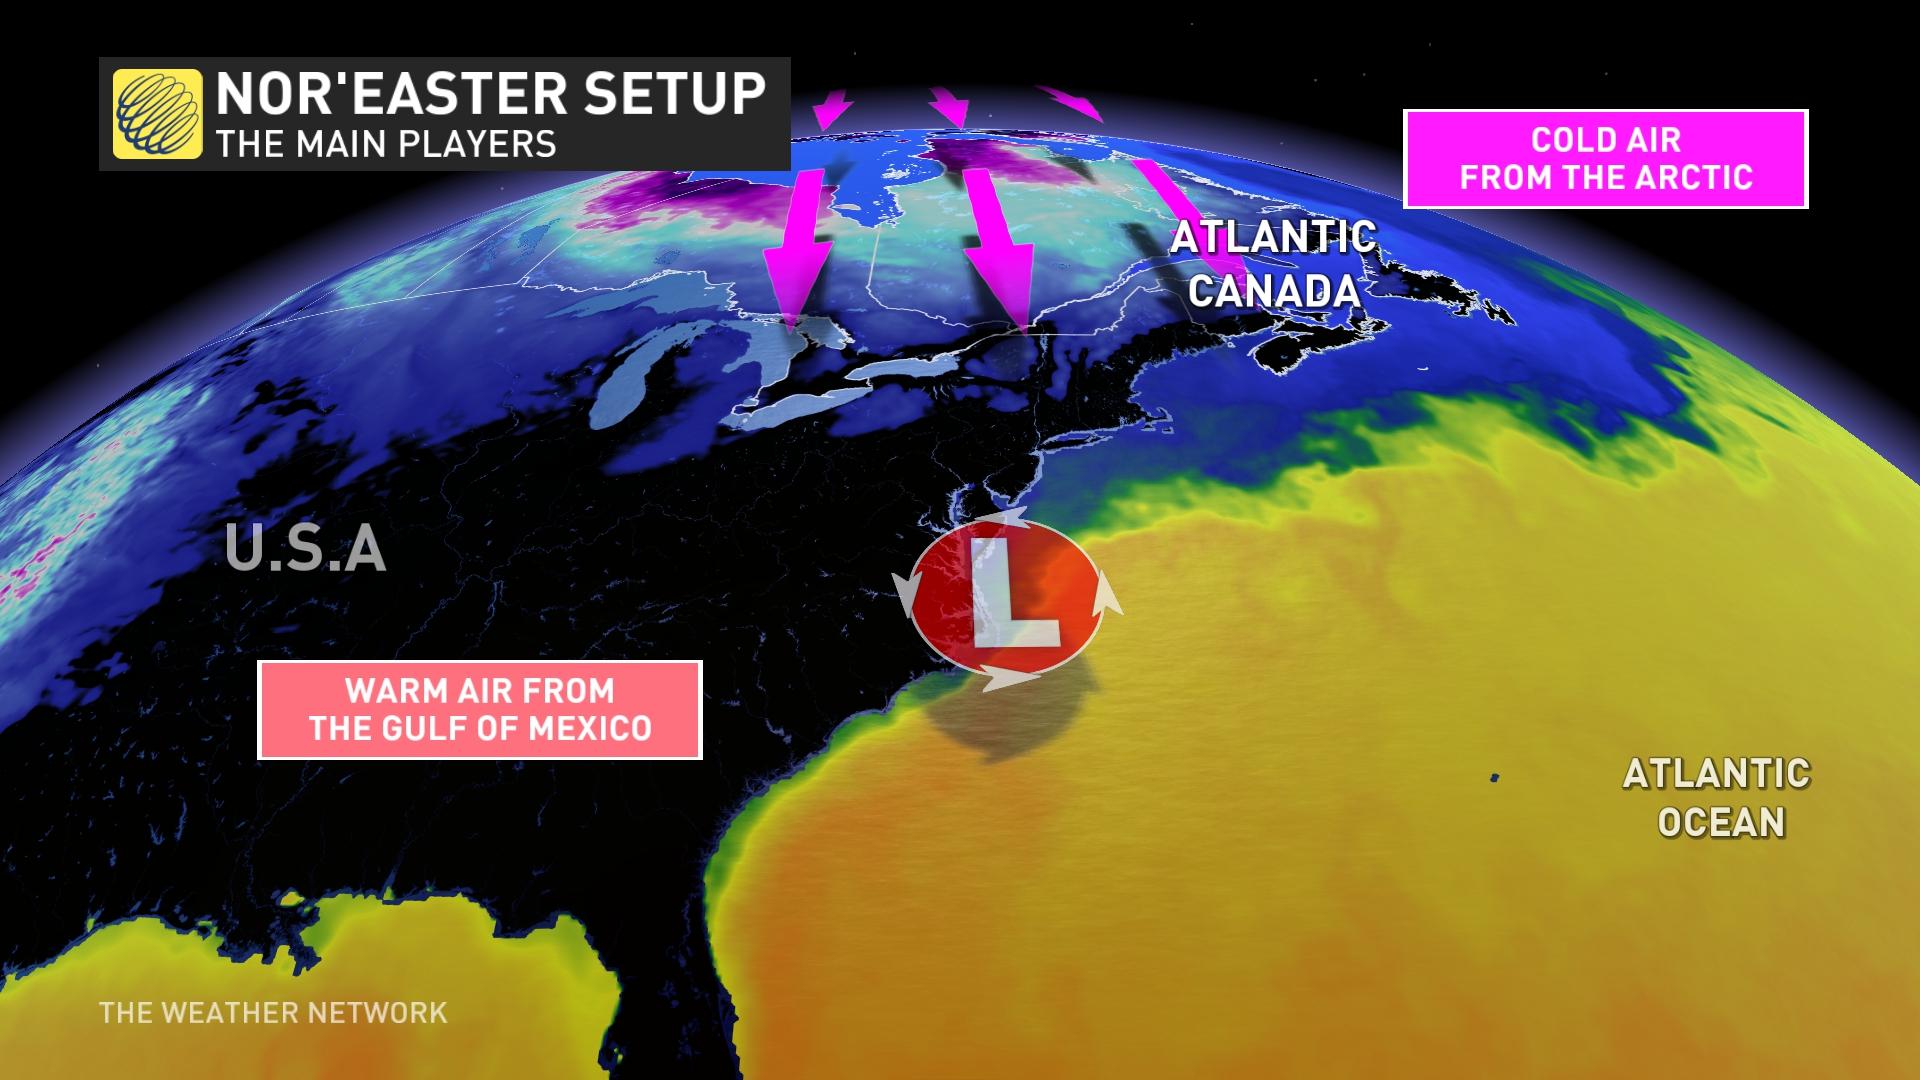 Explainer: Nor'easter setup. What is a nor'easter?